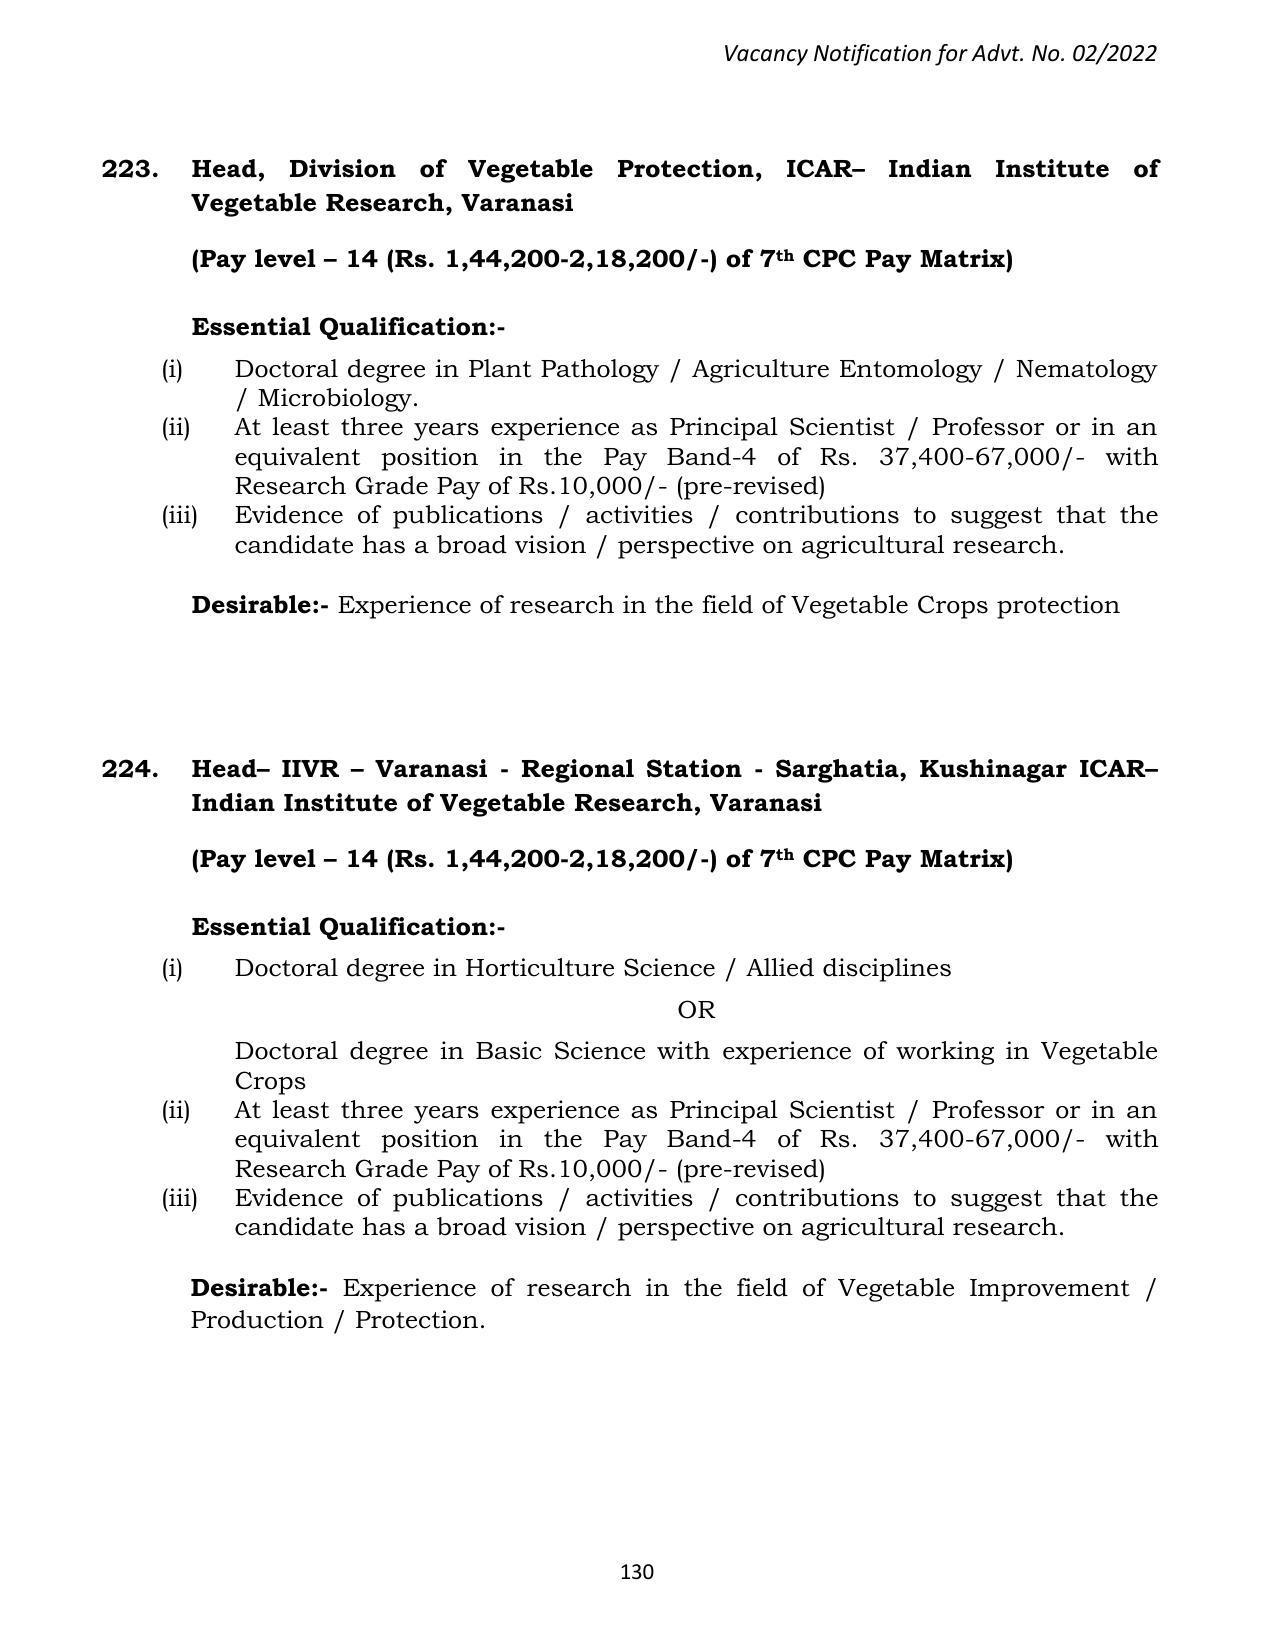 ASRB Non-Research Management Recruitment 2022 - Page 109